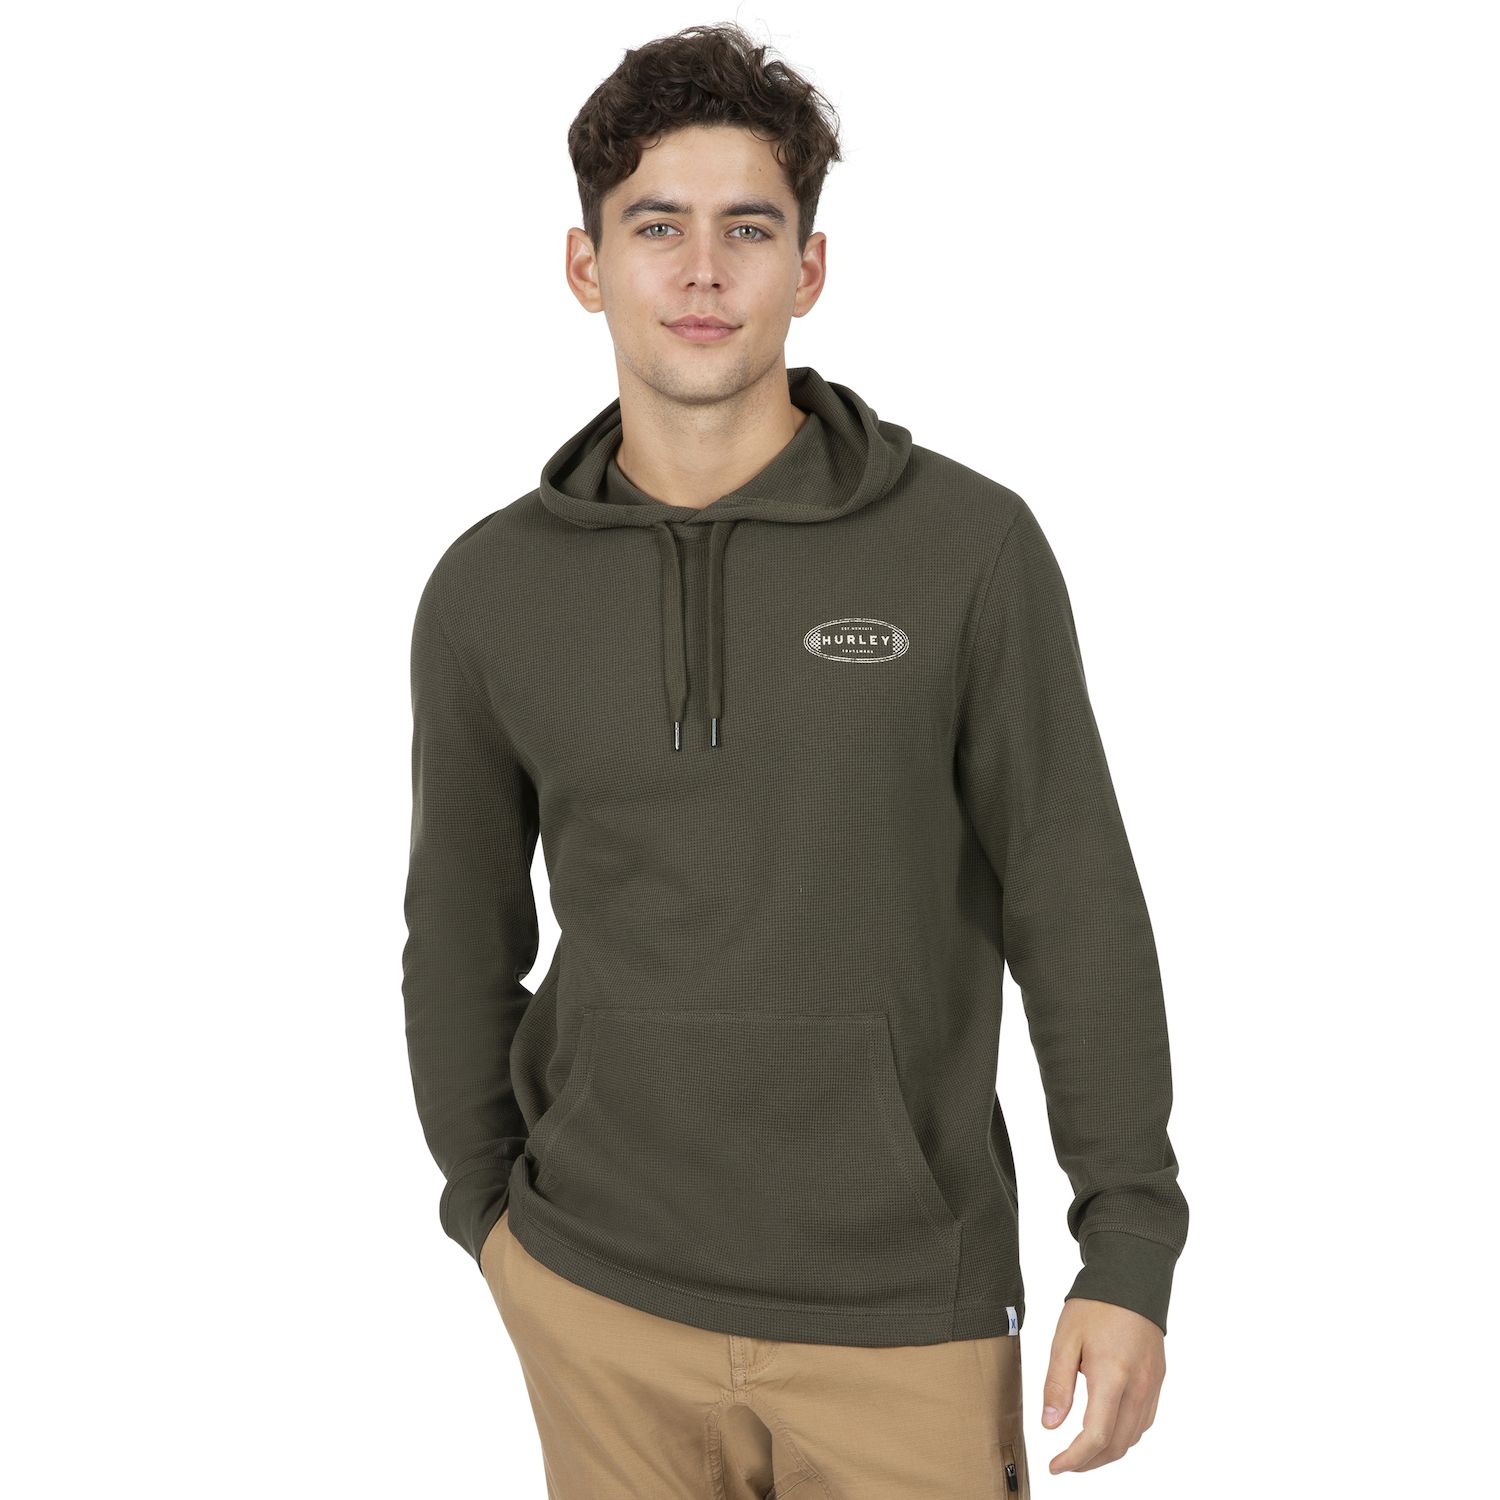 Image for Hurley Men's Thermal Hoodie at Kohl's.